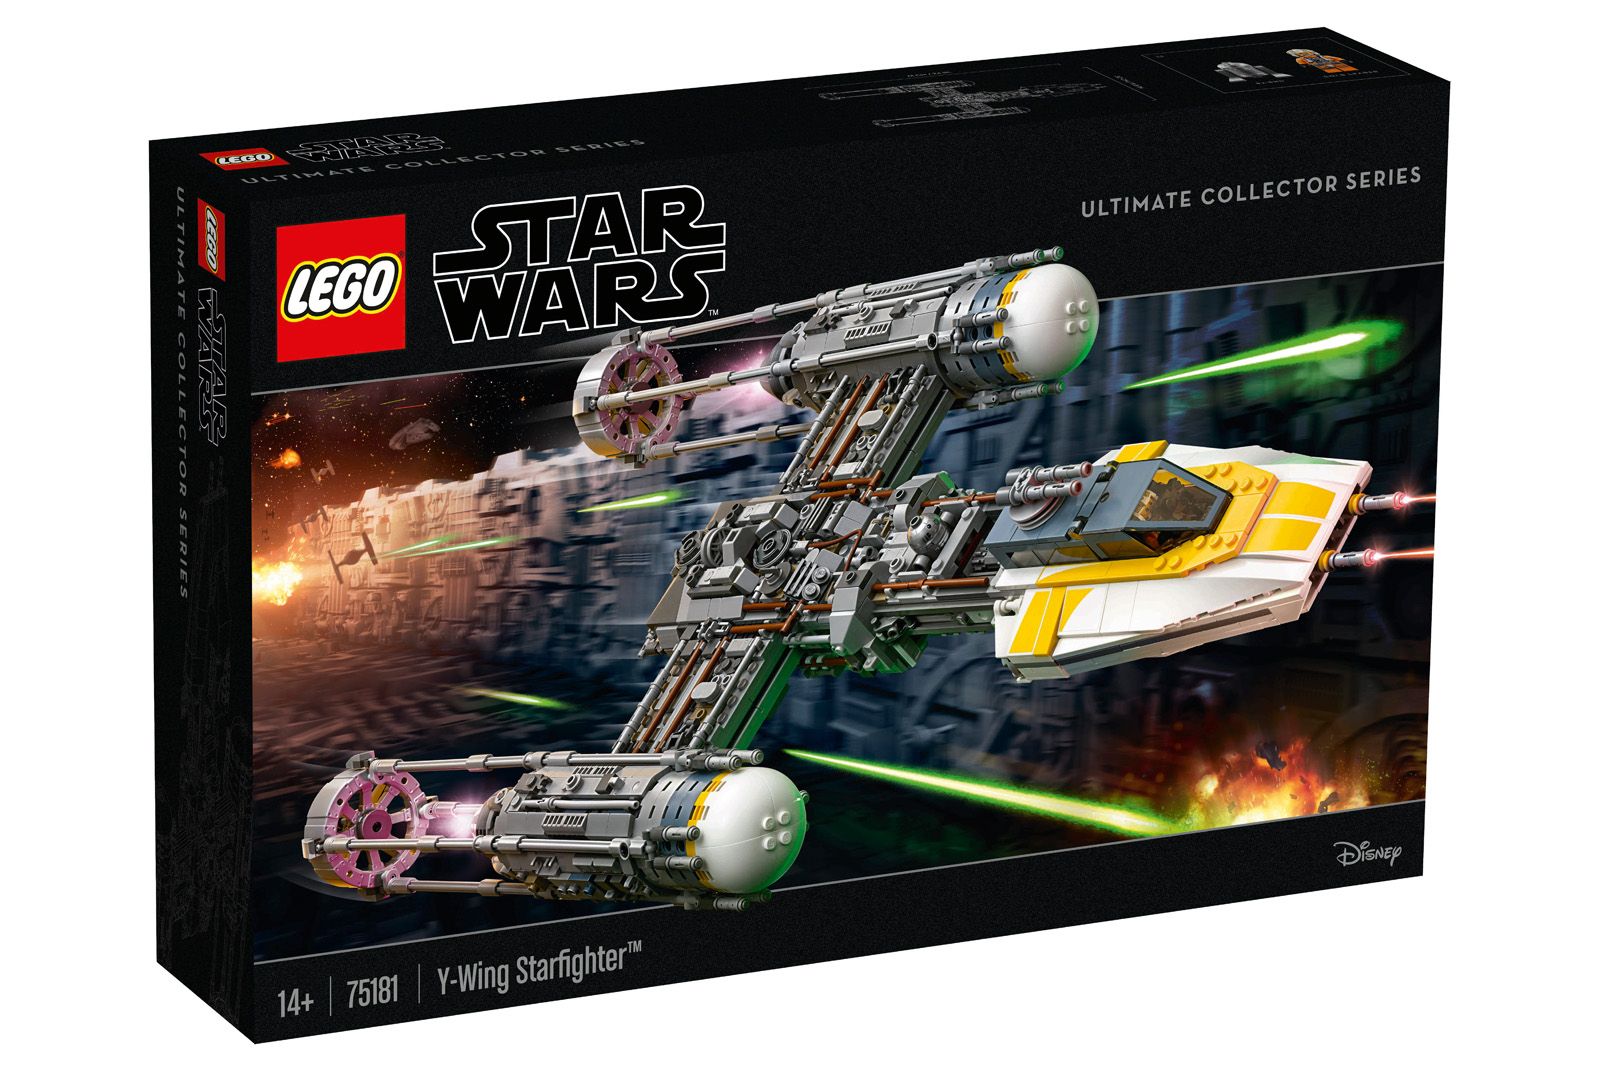 The latest Lego Star Wars set is a superb model of the Y-Wing Starfighter image 2